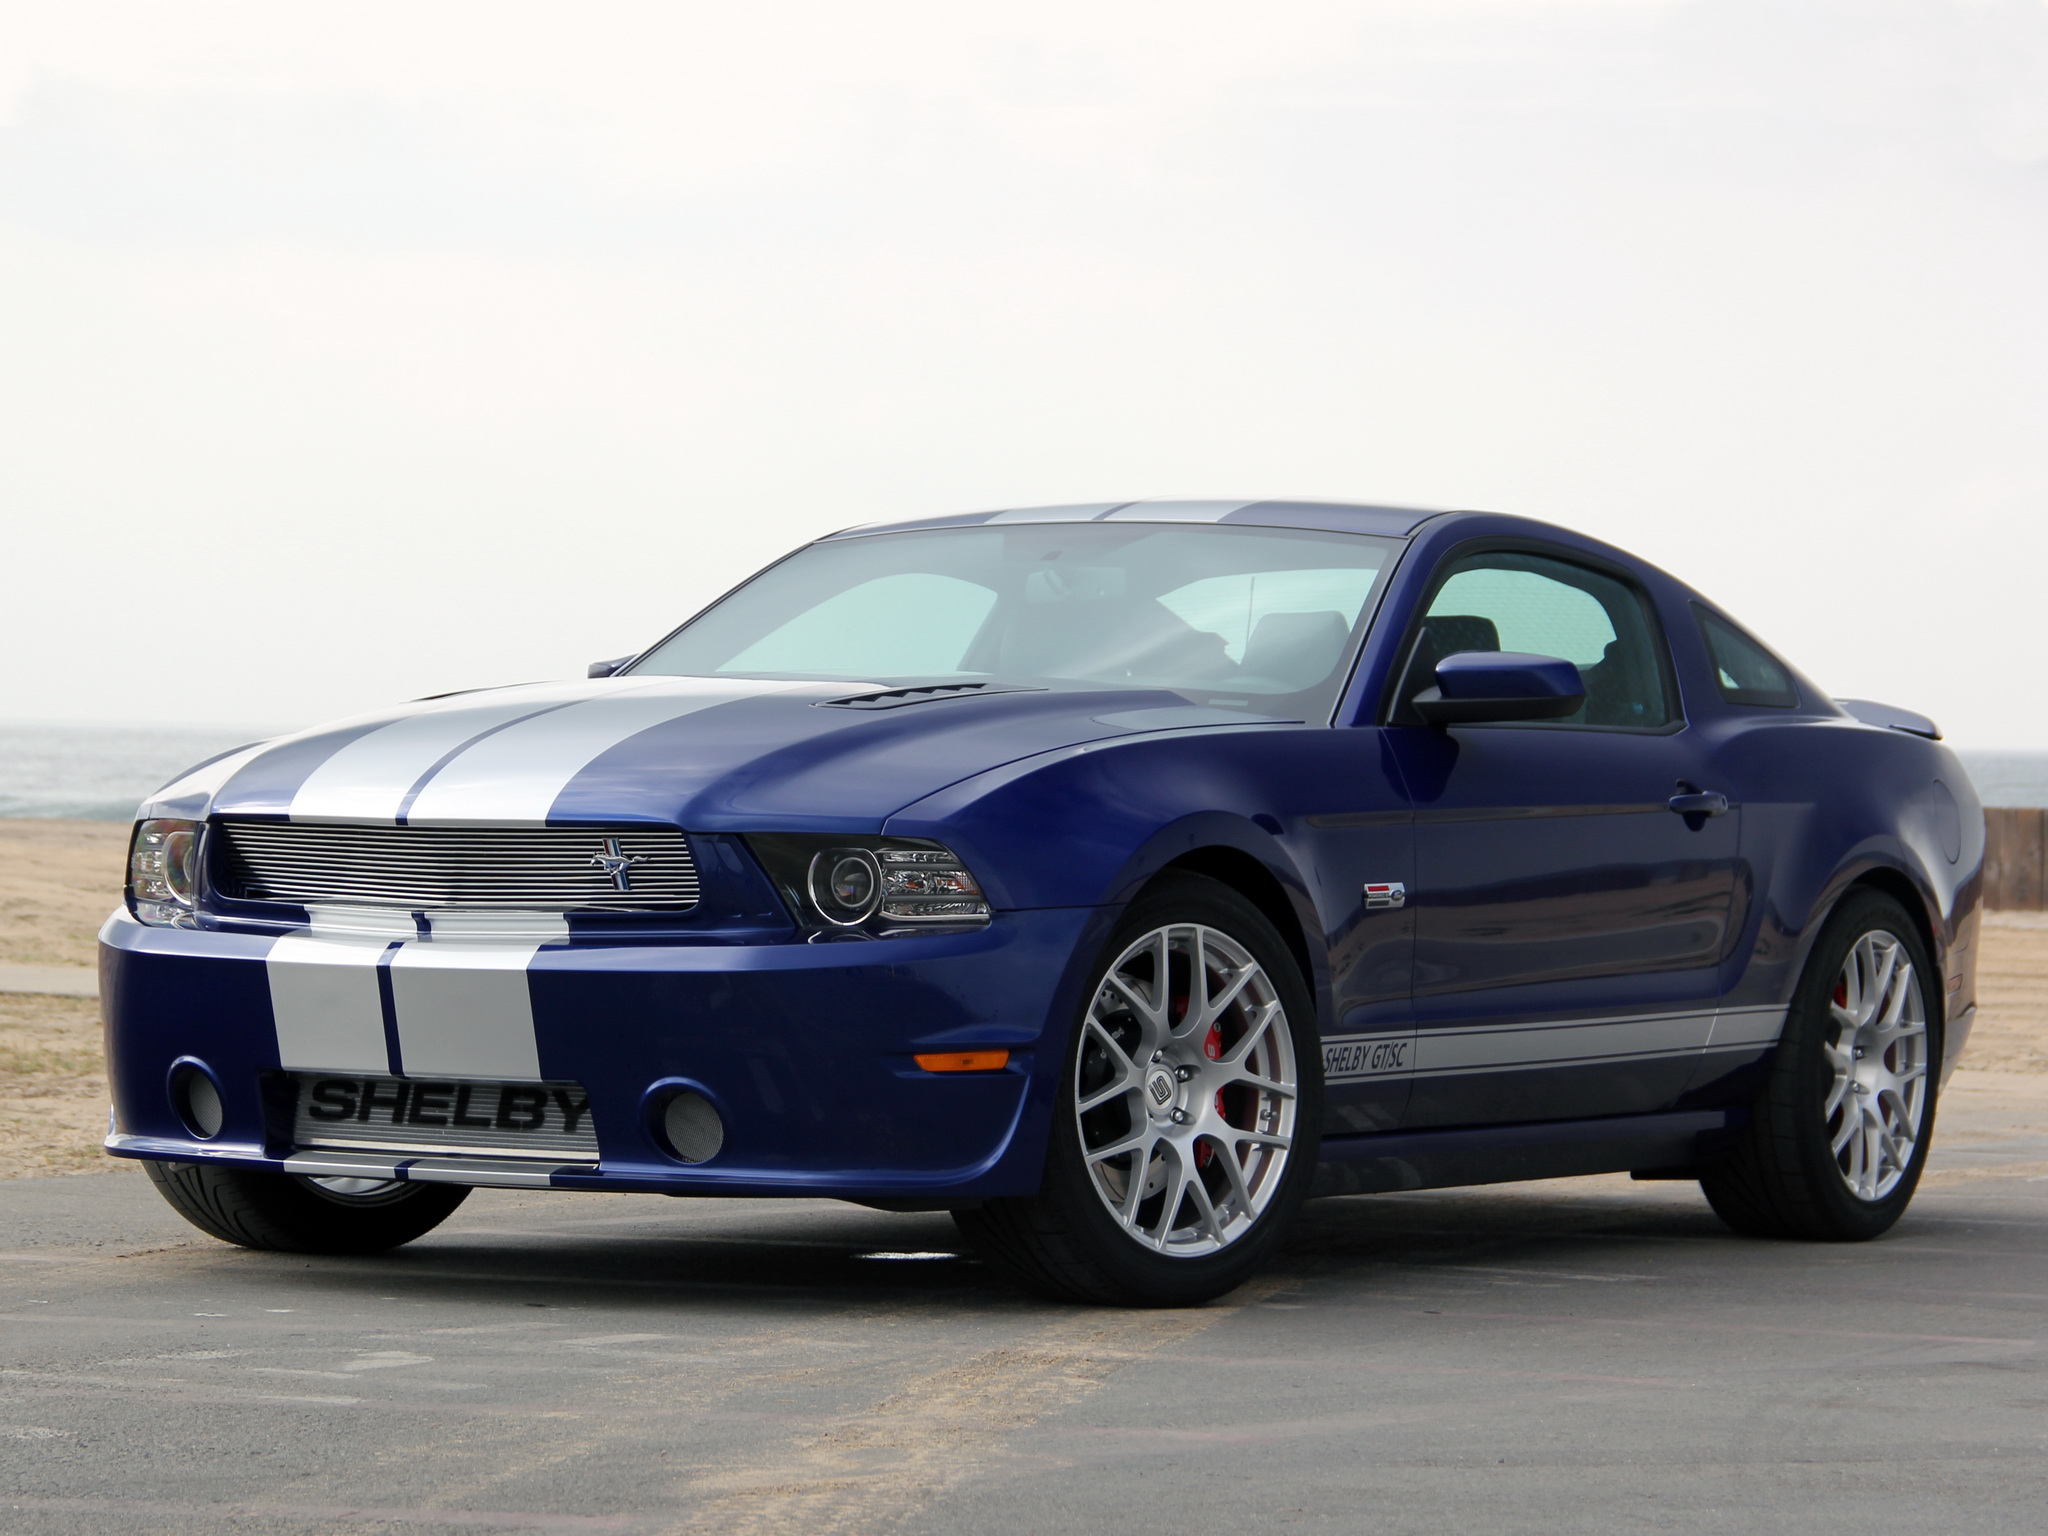 Shelby Ford Mustang Gt Sc Muscle F Wallpaper